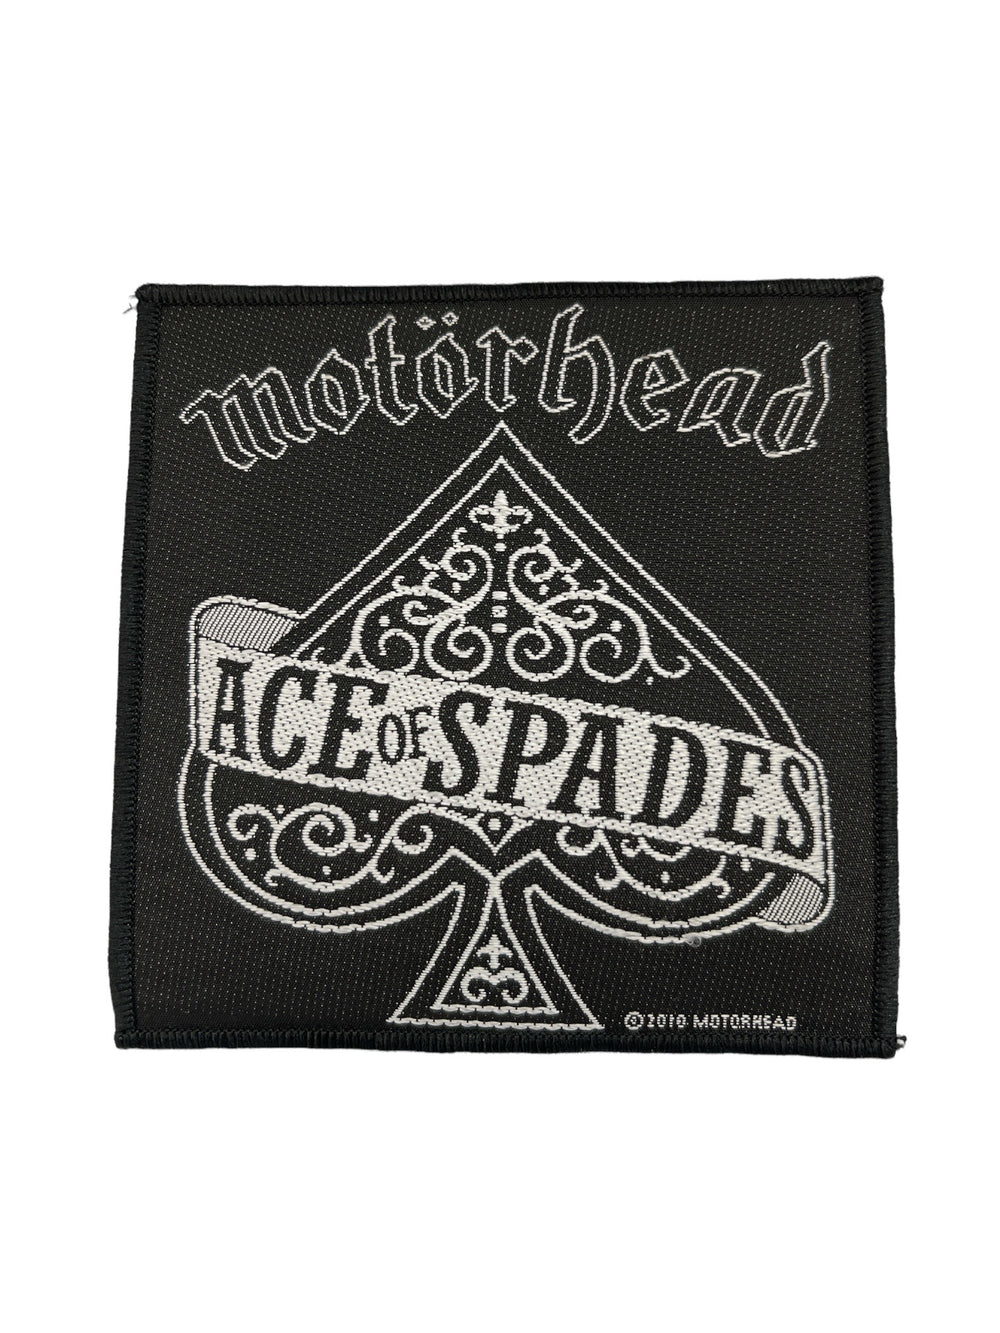 Motorhead Ace Of Spades Official Woven Patch Brand New